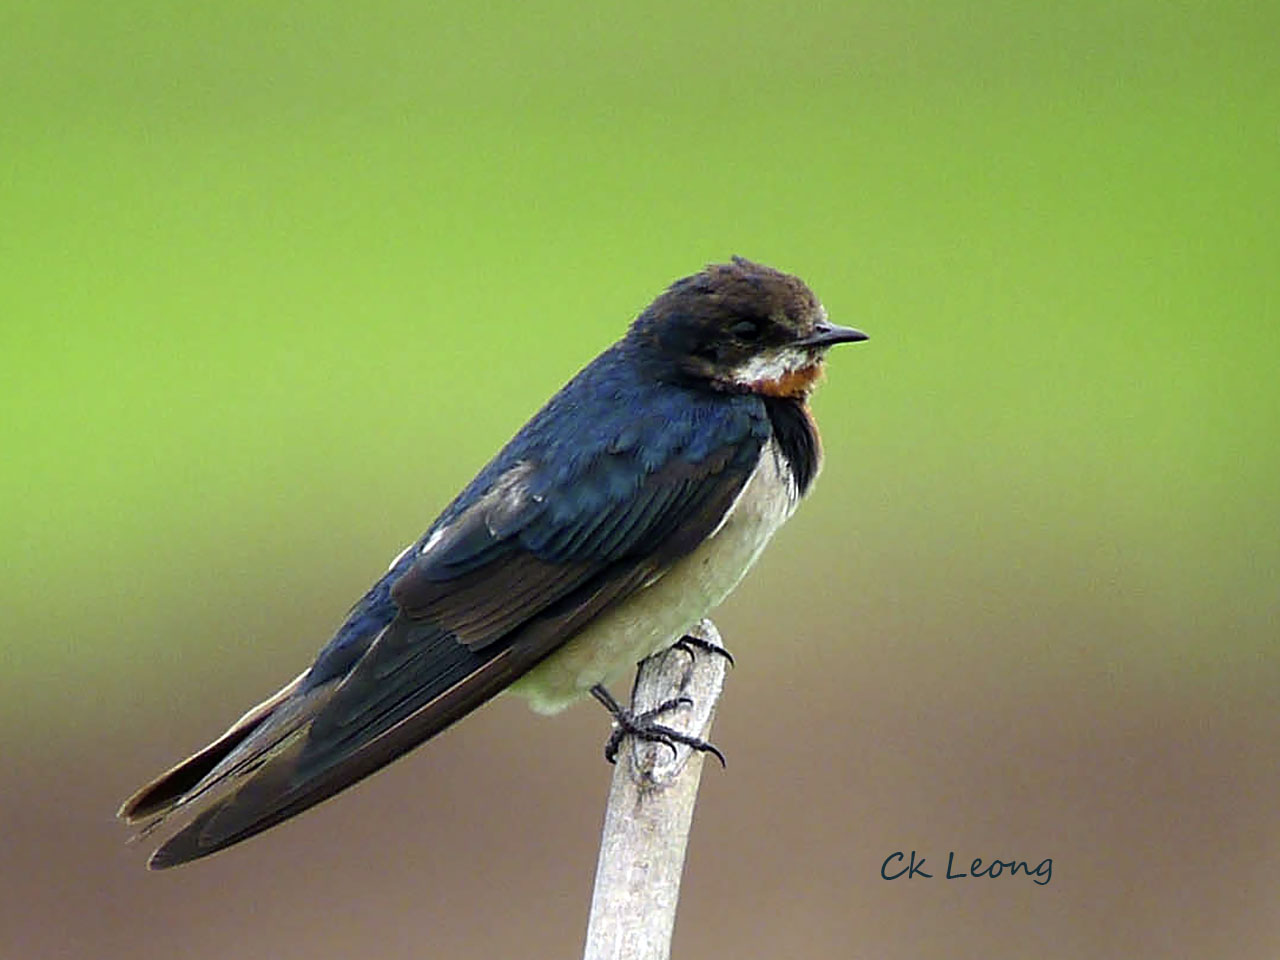 Winter migration is here again and leading the charge are thousands of Barn Swallows. You see them in all kinds of habitat from coastal to montane areas.